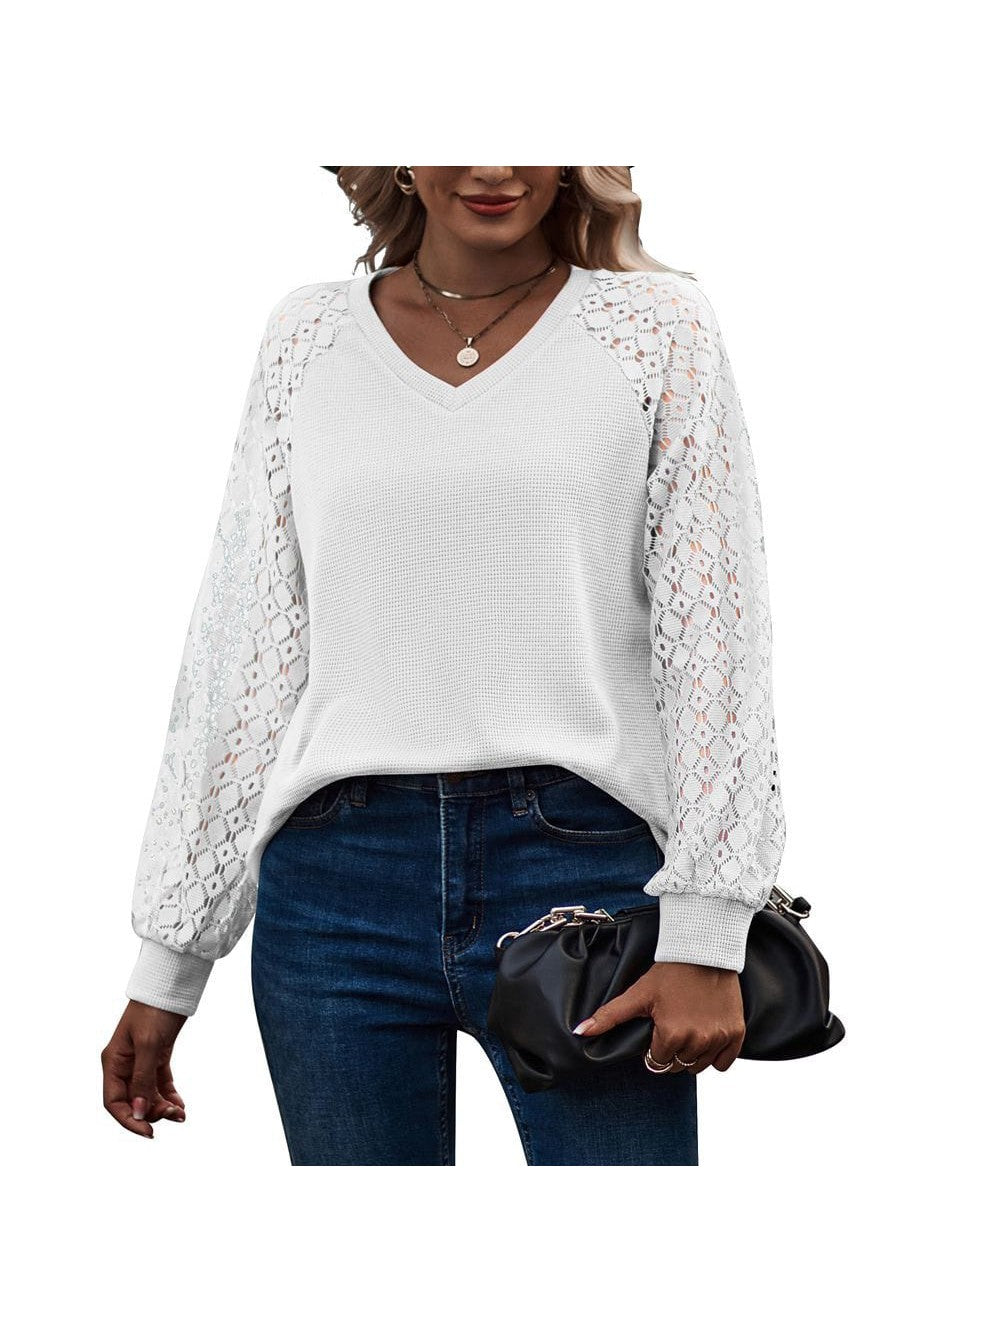 Women's lace bubble sleeve V-neck long-sleeved top